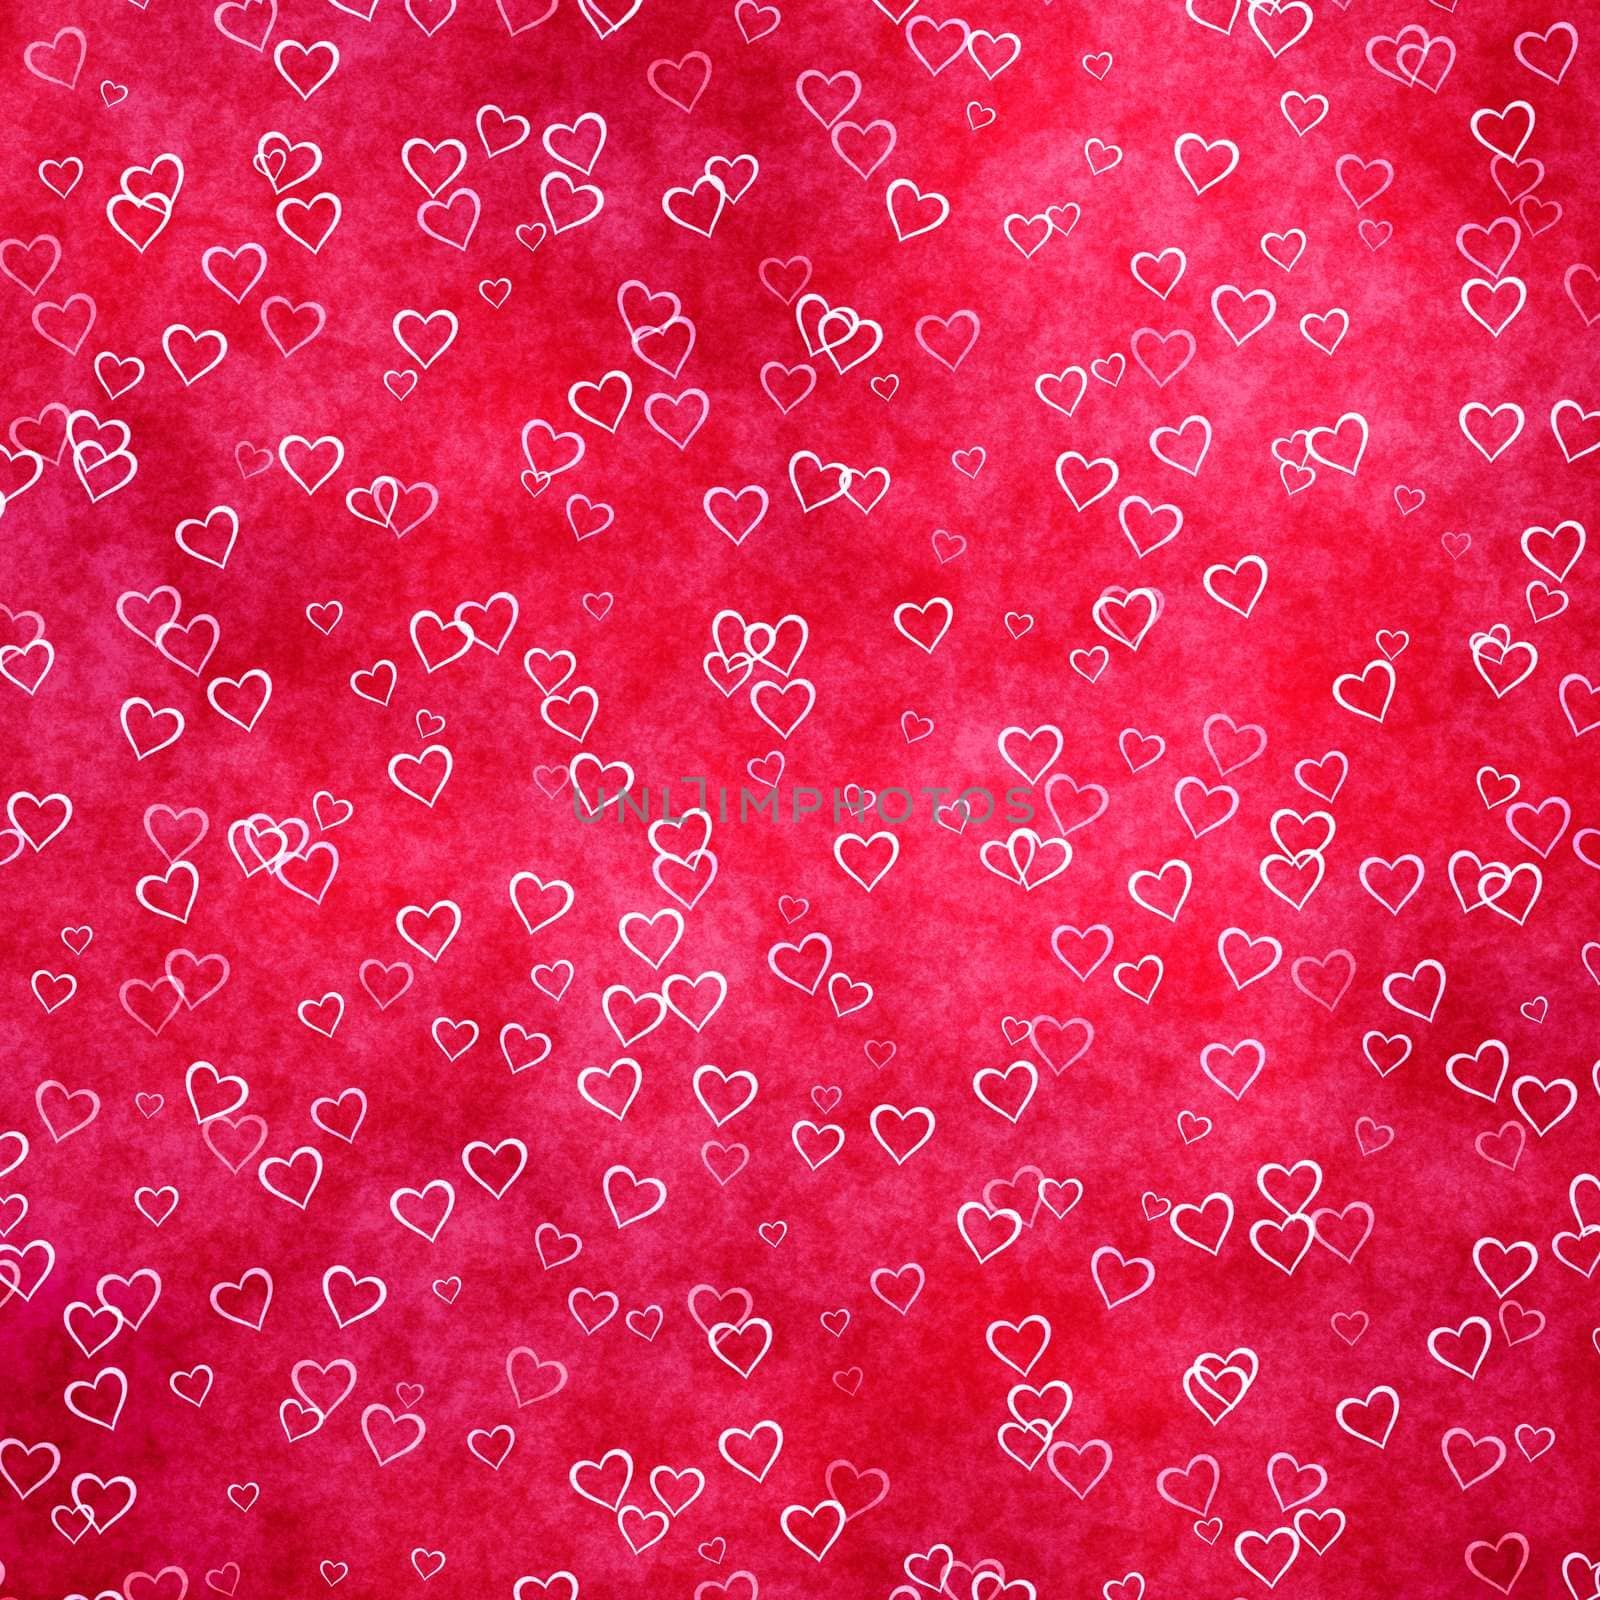 love hearts by clearviewstock